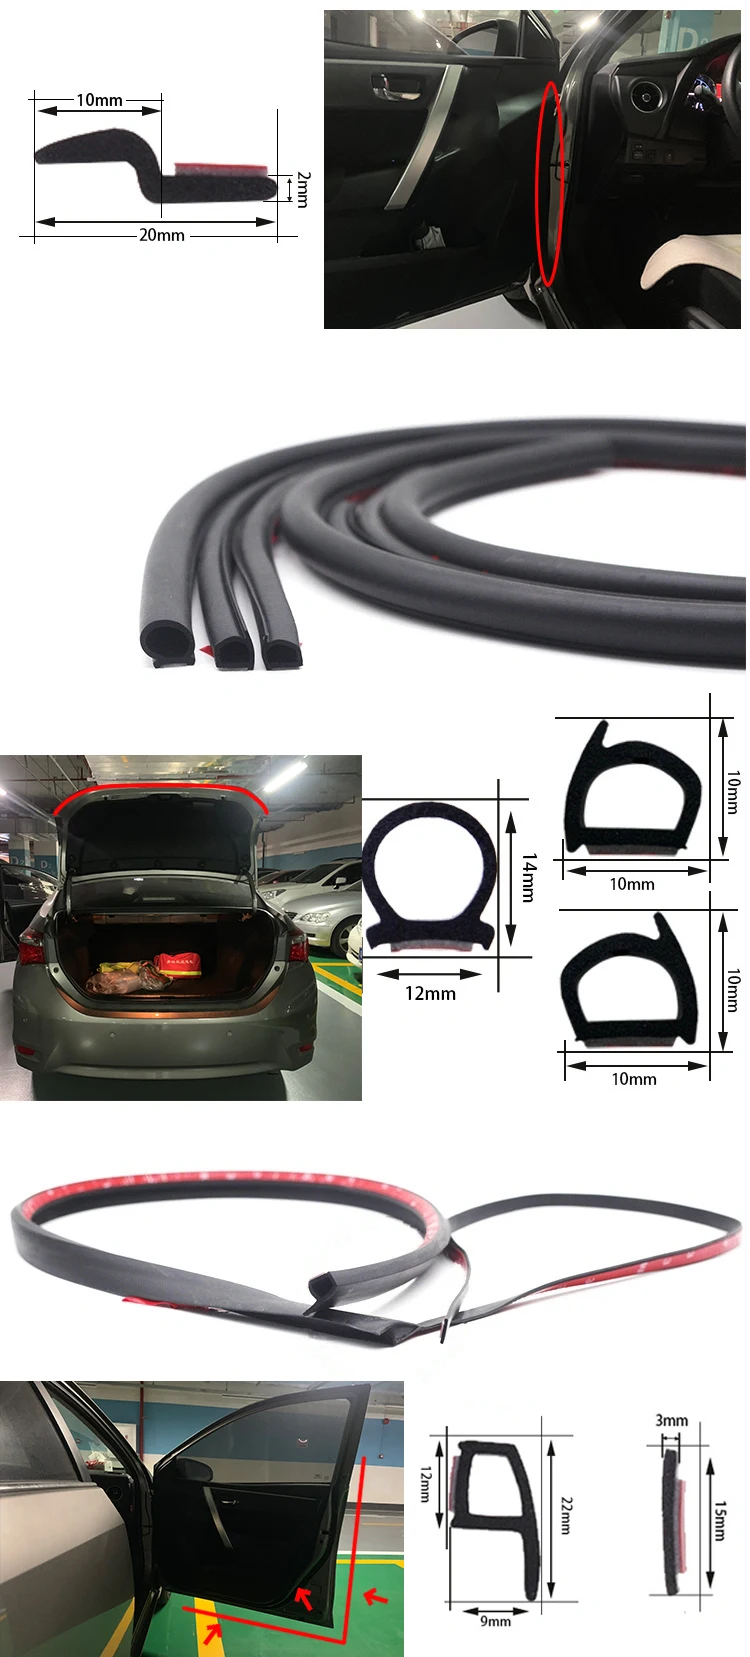 Extrude Manufacturers Of Price Processing Service Custom Density Flexible Universal Soft Epdm Rubber Profile 3m Door Seals